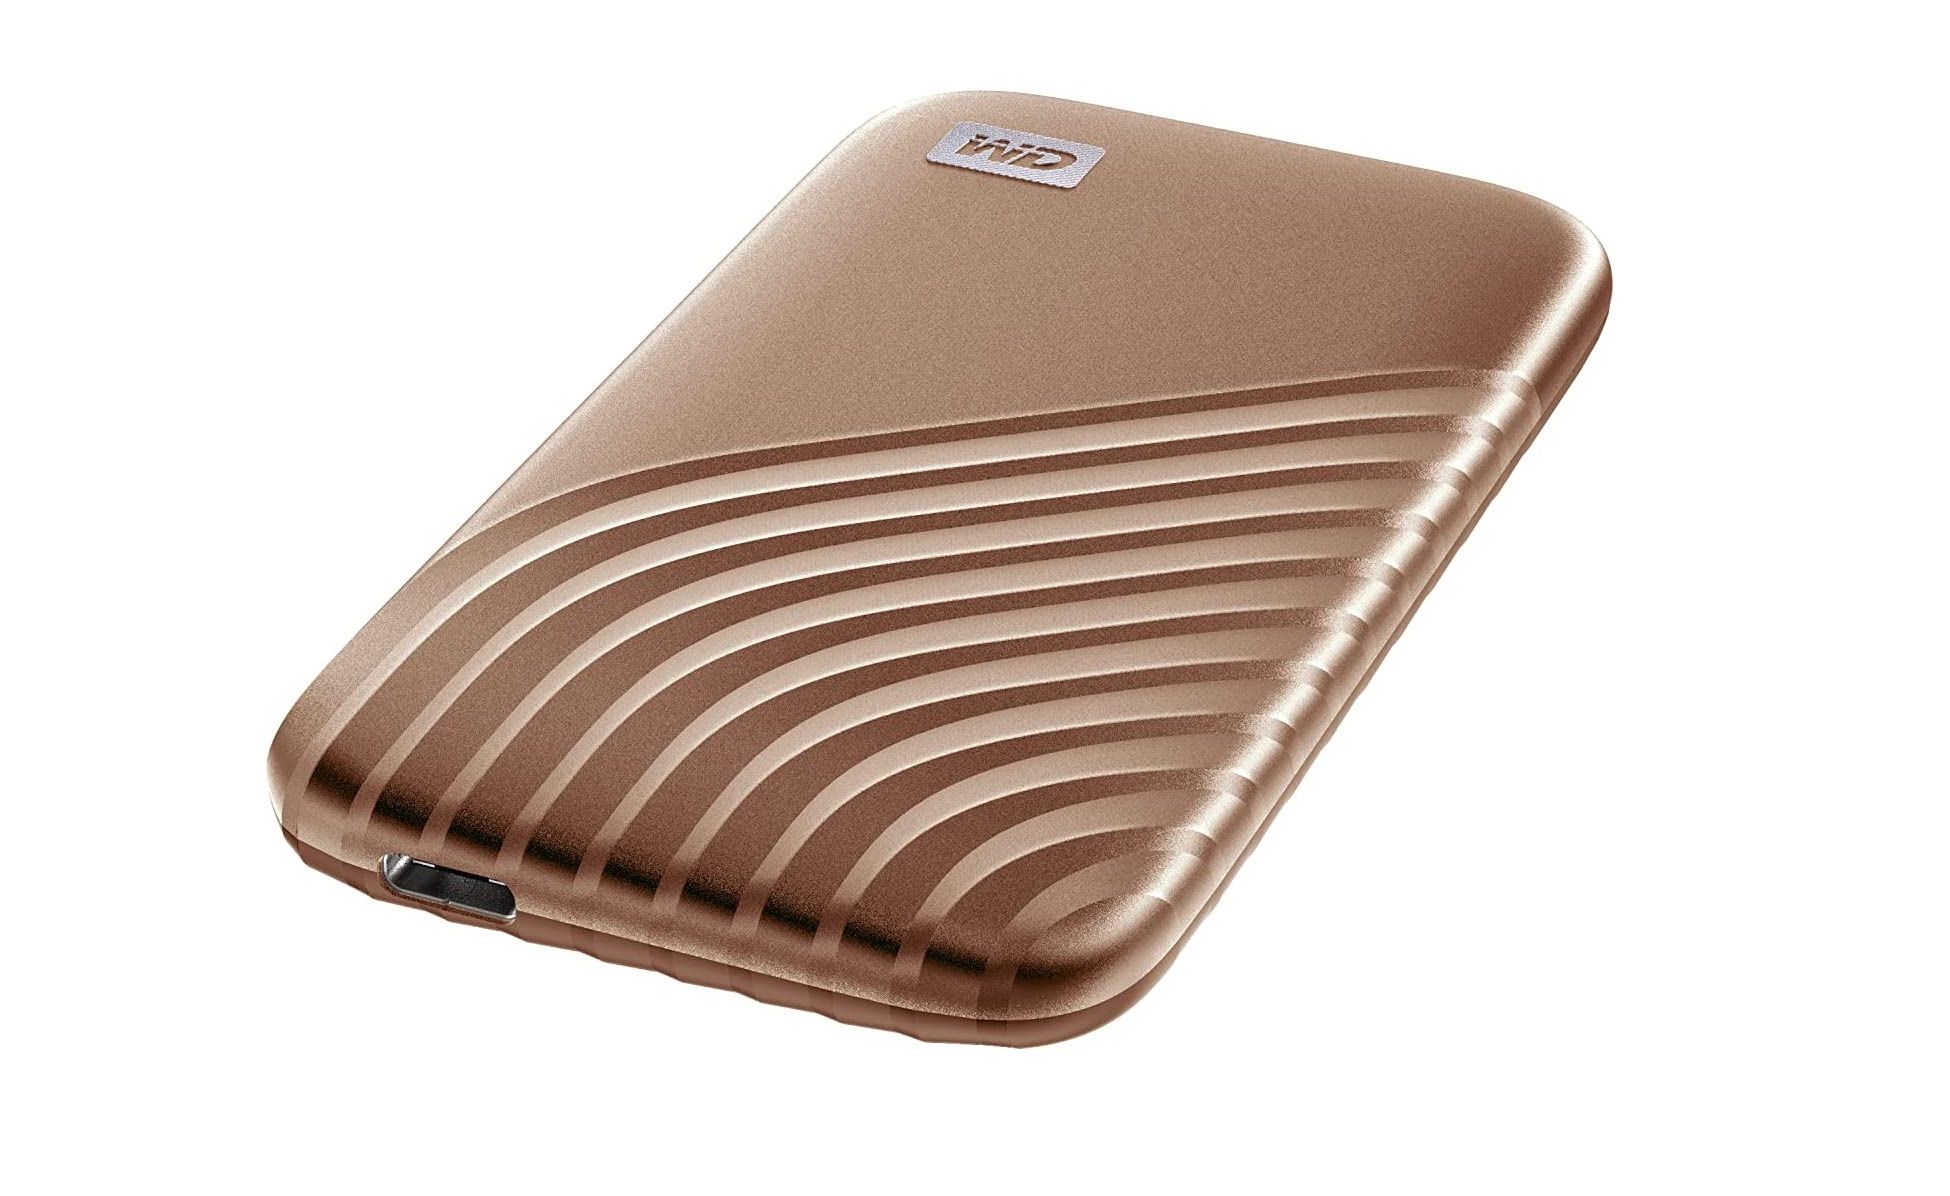 western digital my passport solid state drive with a gold finish